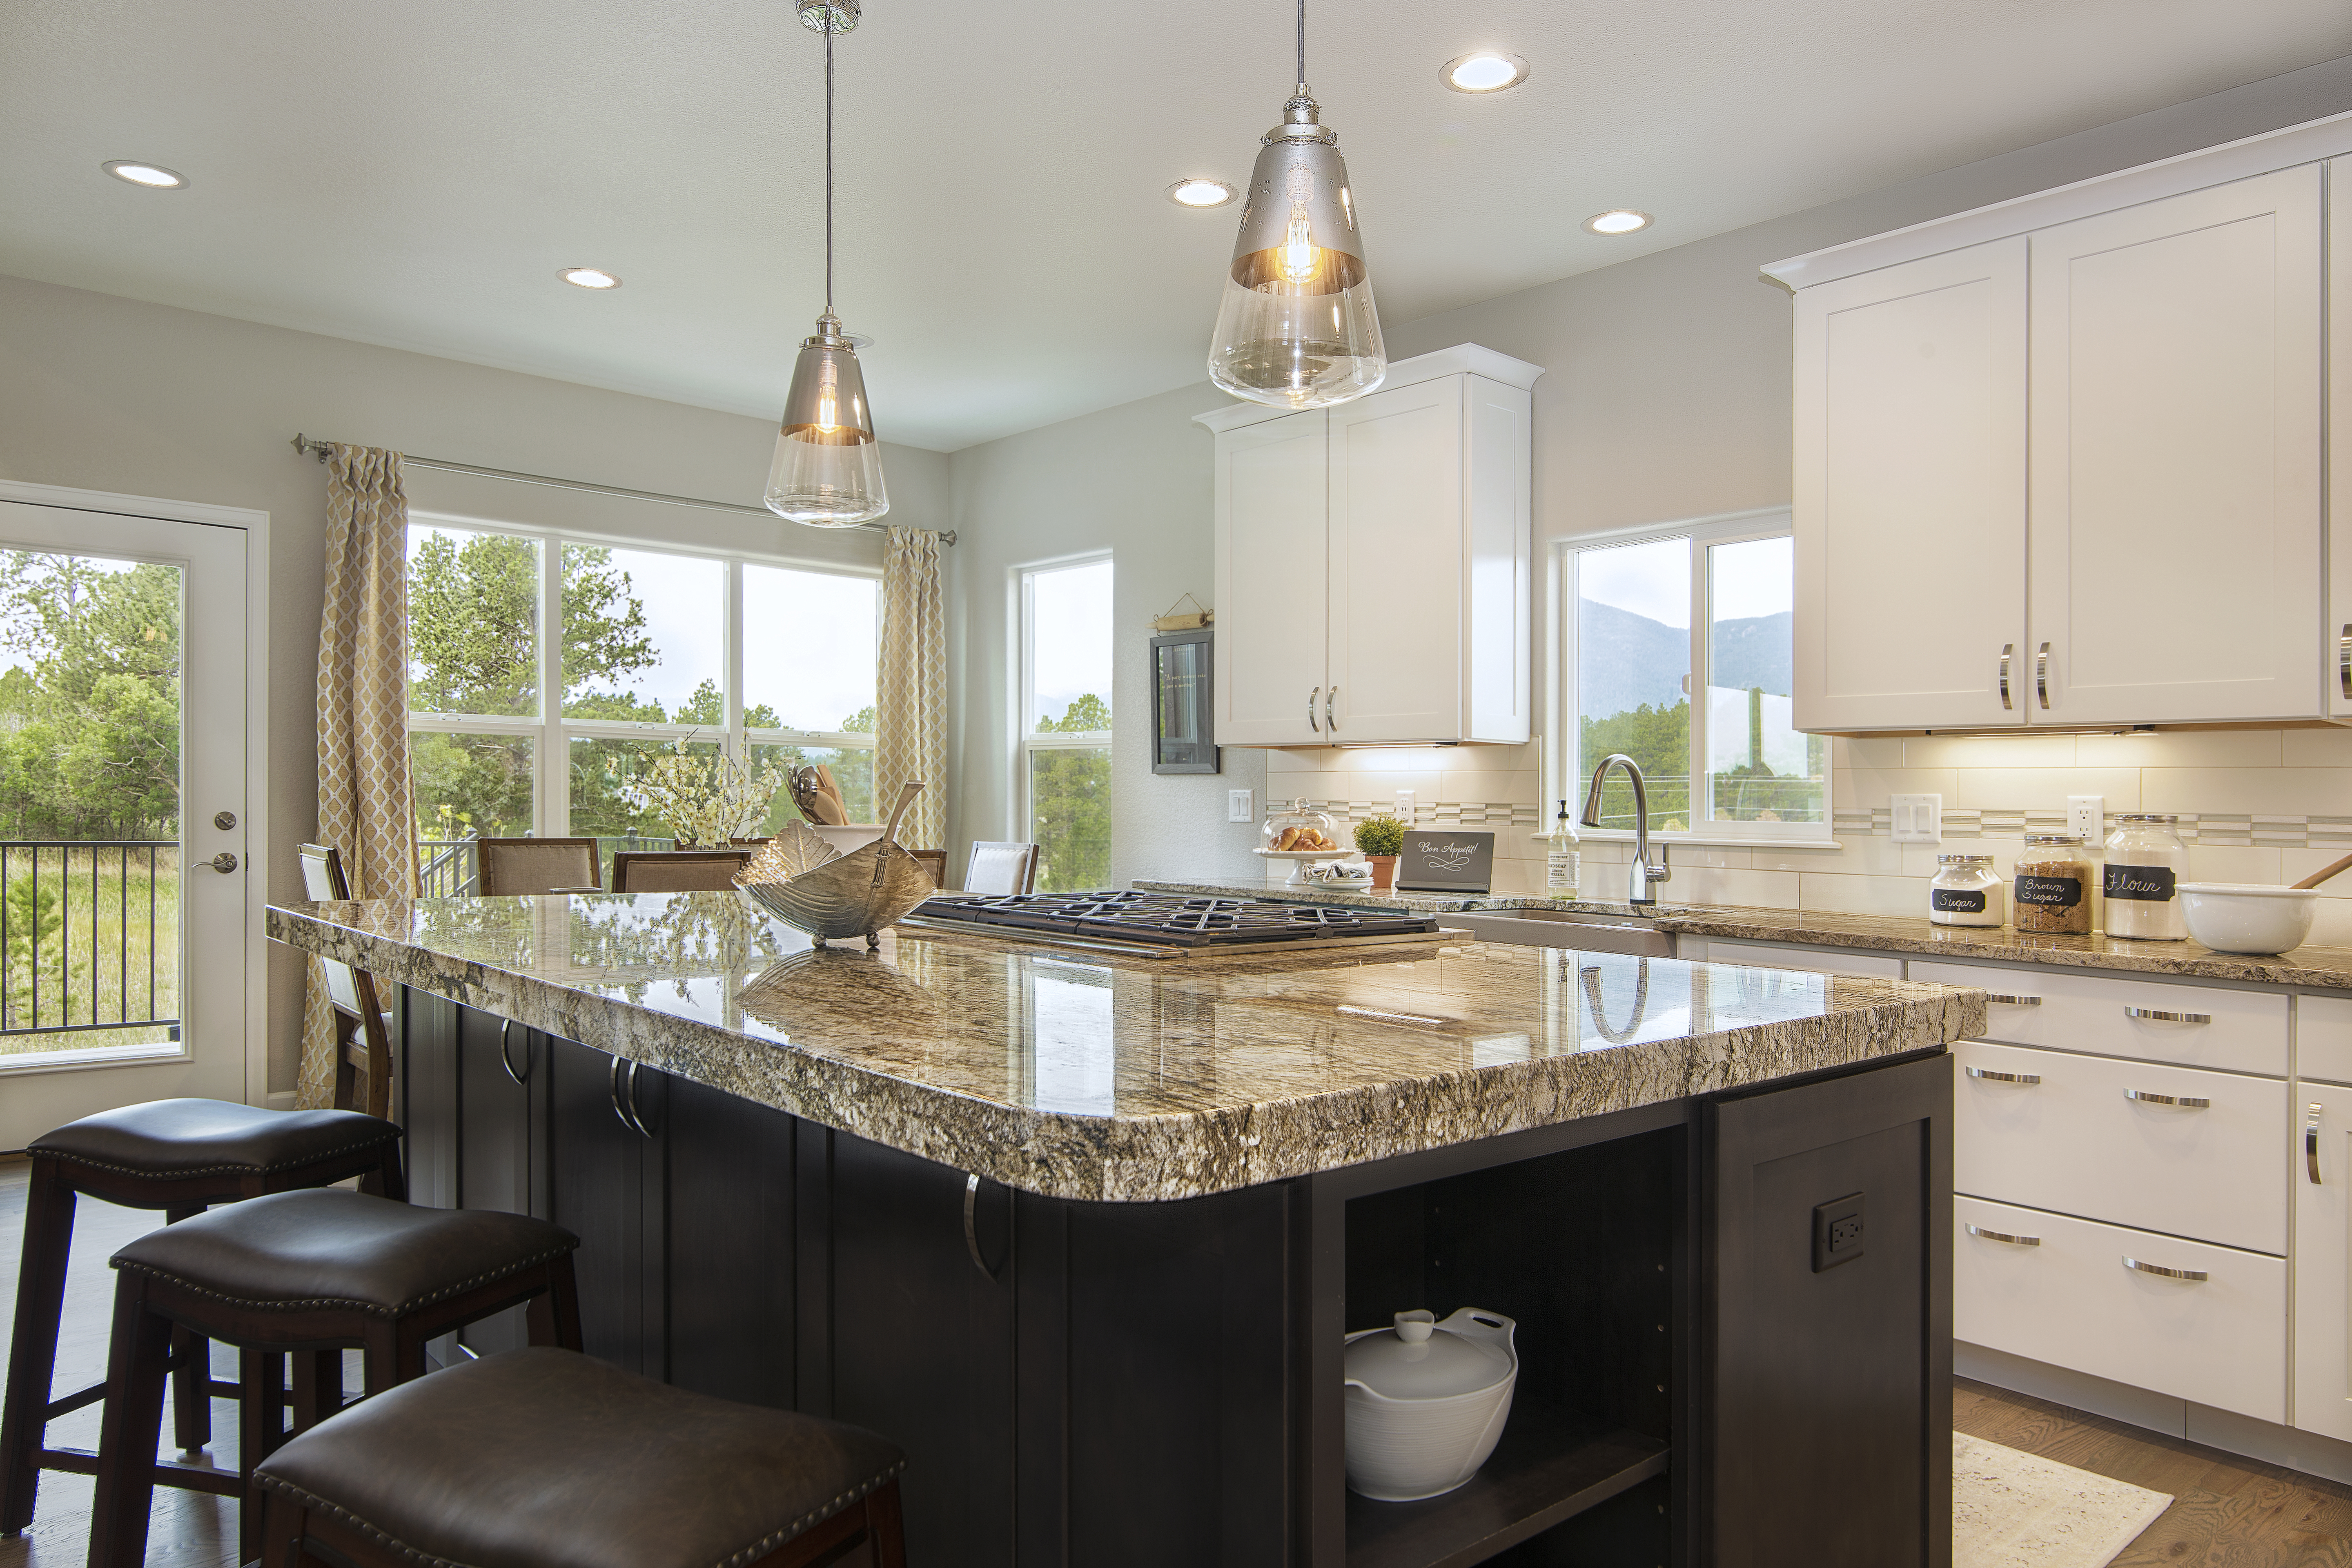 Best Are Black Granite Countertops Out Of Style Ideas in 2022